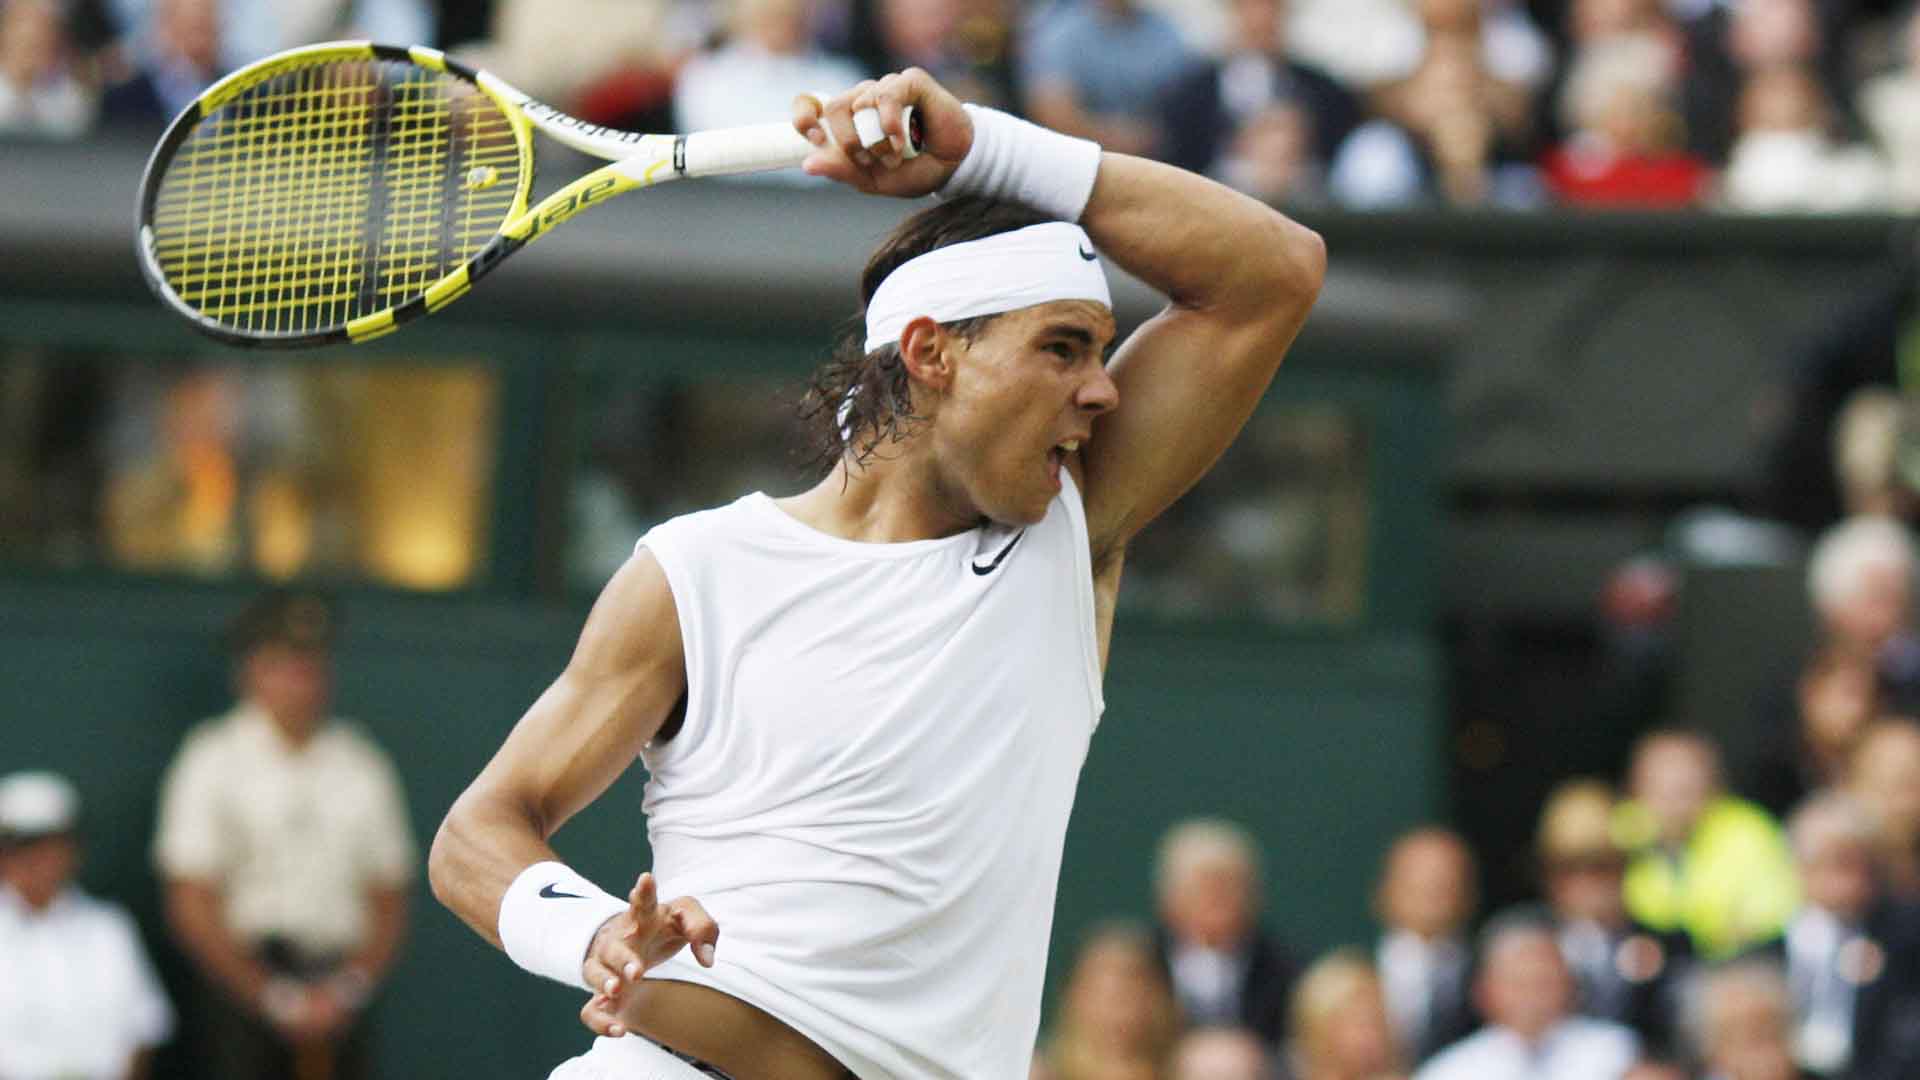 Rafael Nadal outlasts five-time defending champion Roger Federer 6-4, 6-4, 6-7(5), 6-7(8), 9-7 to win his maiden Wimbledon title.